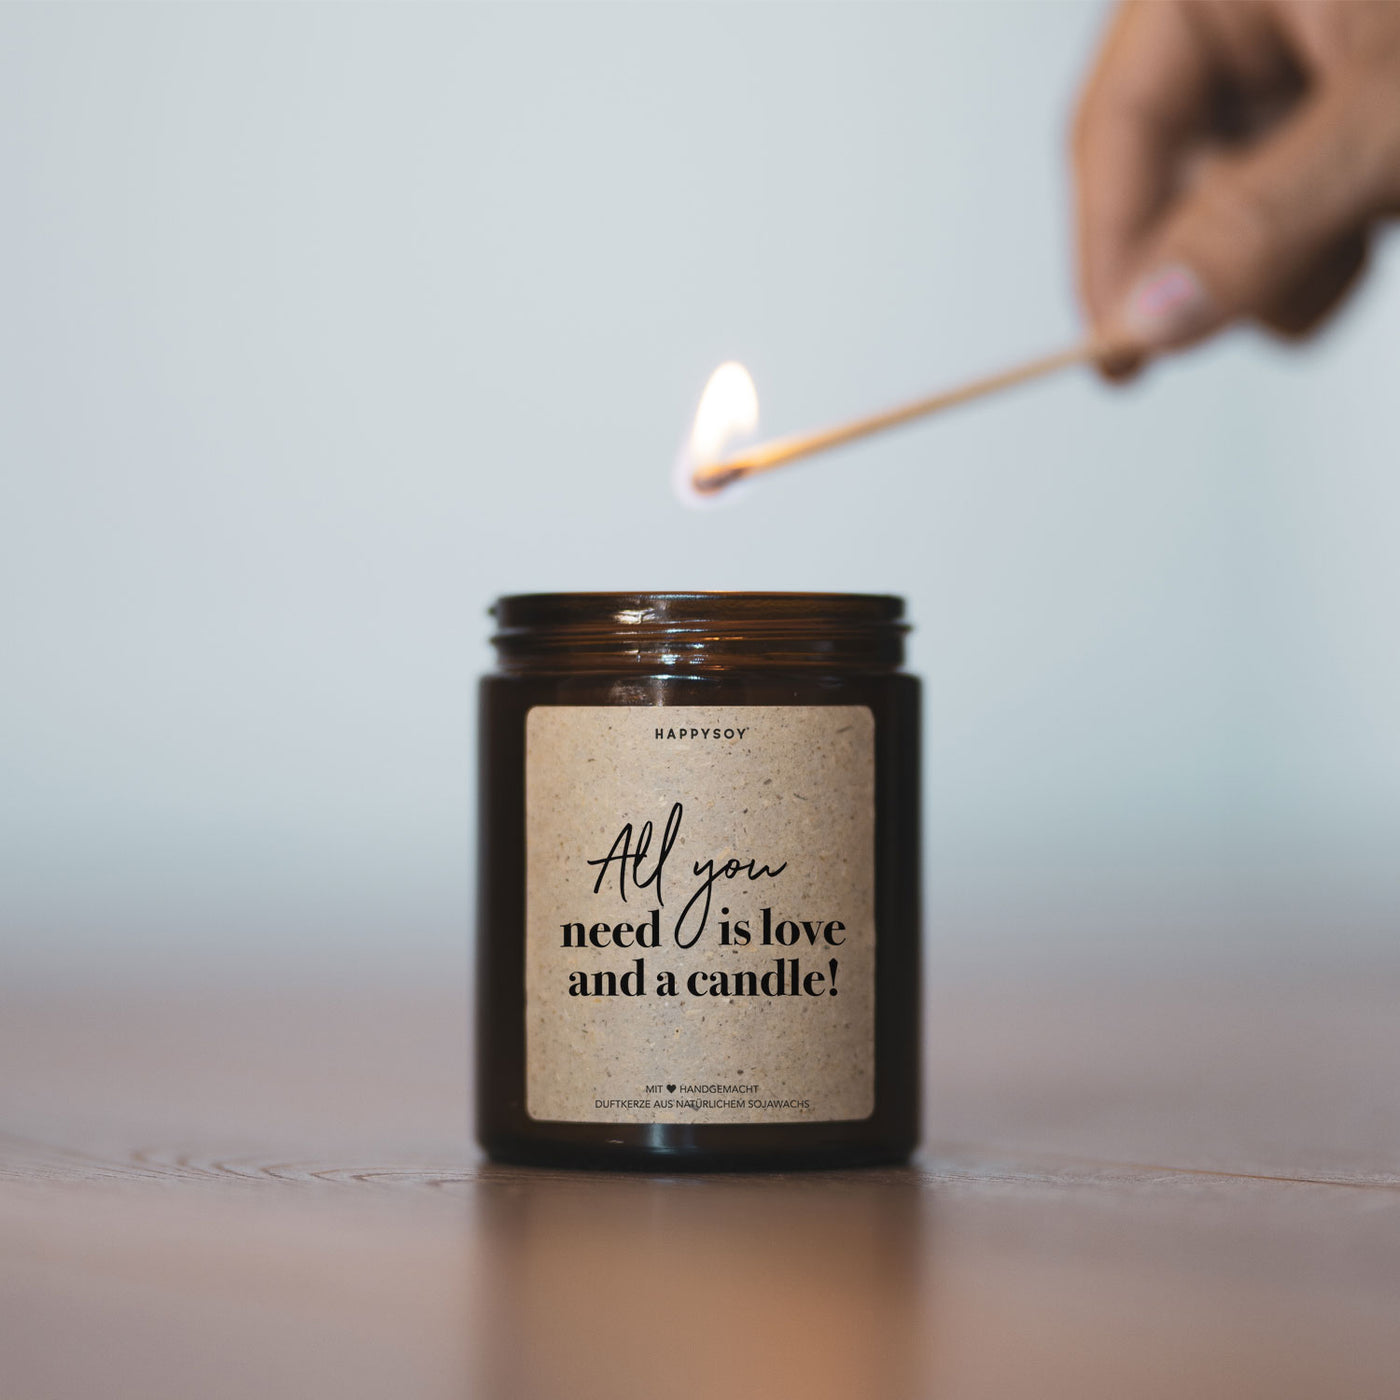 sojawachs-duftkerze-apothekerglas-all-you-need-is-love-and-a-candle